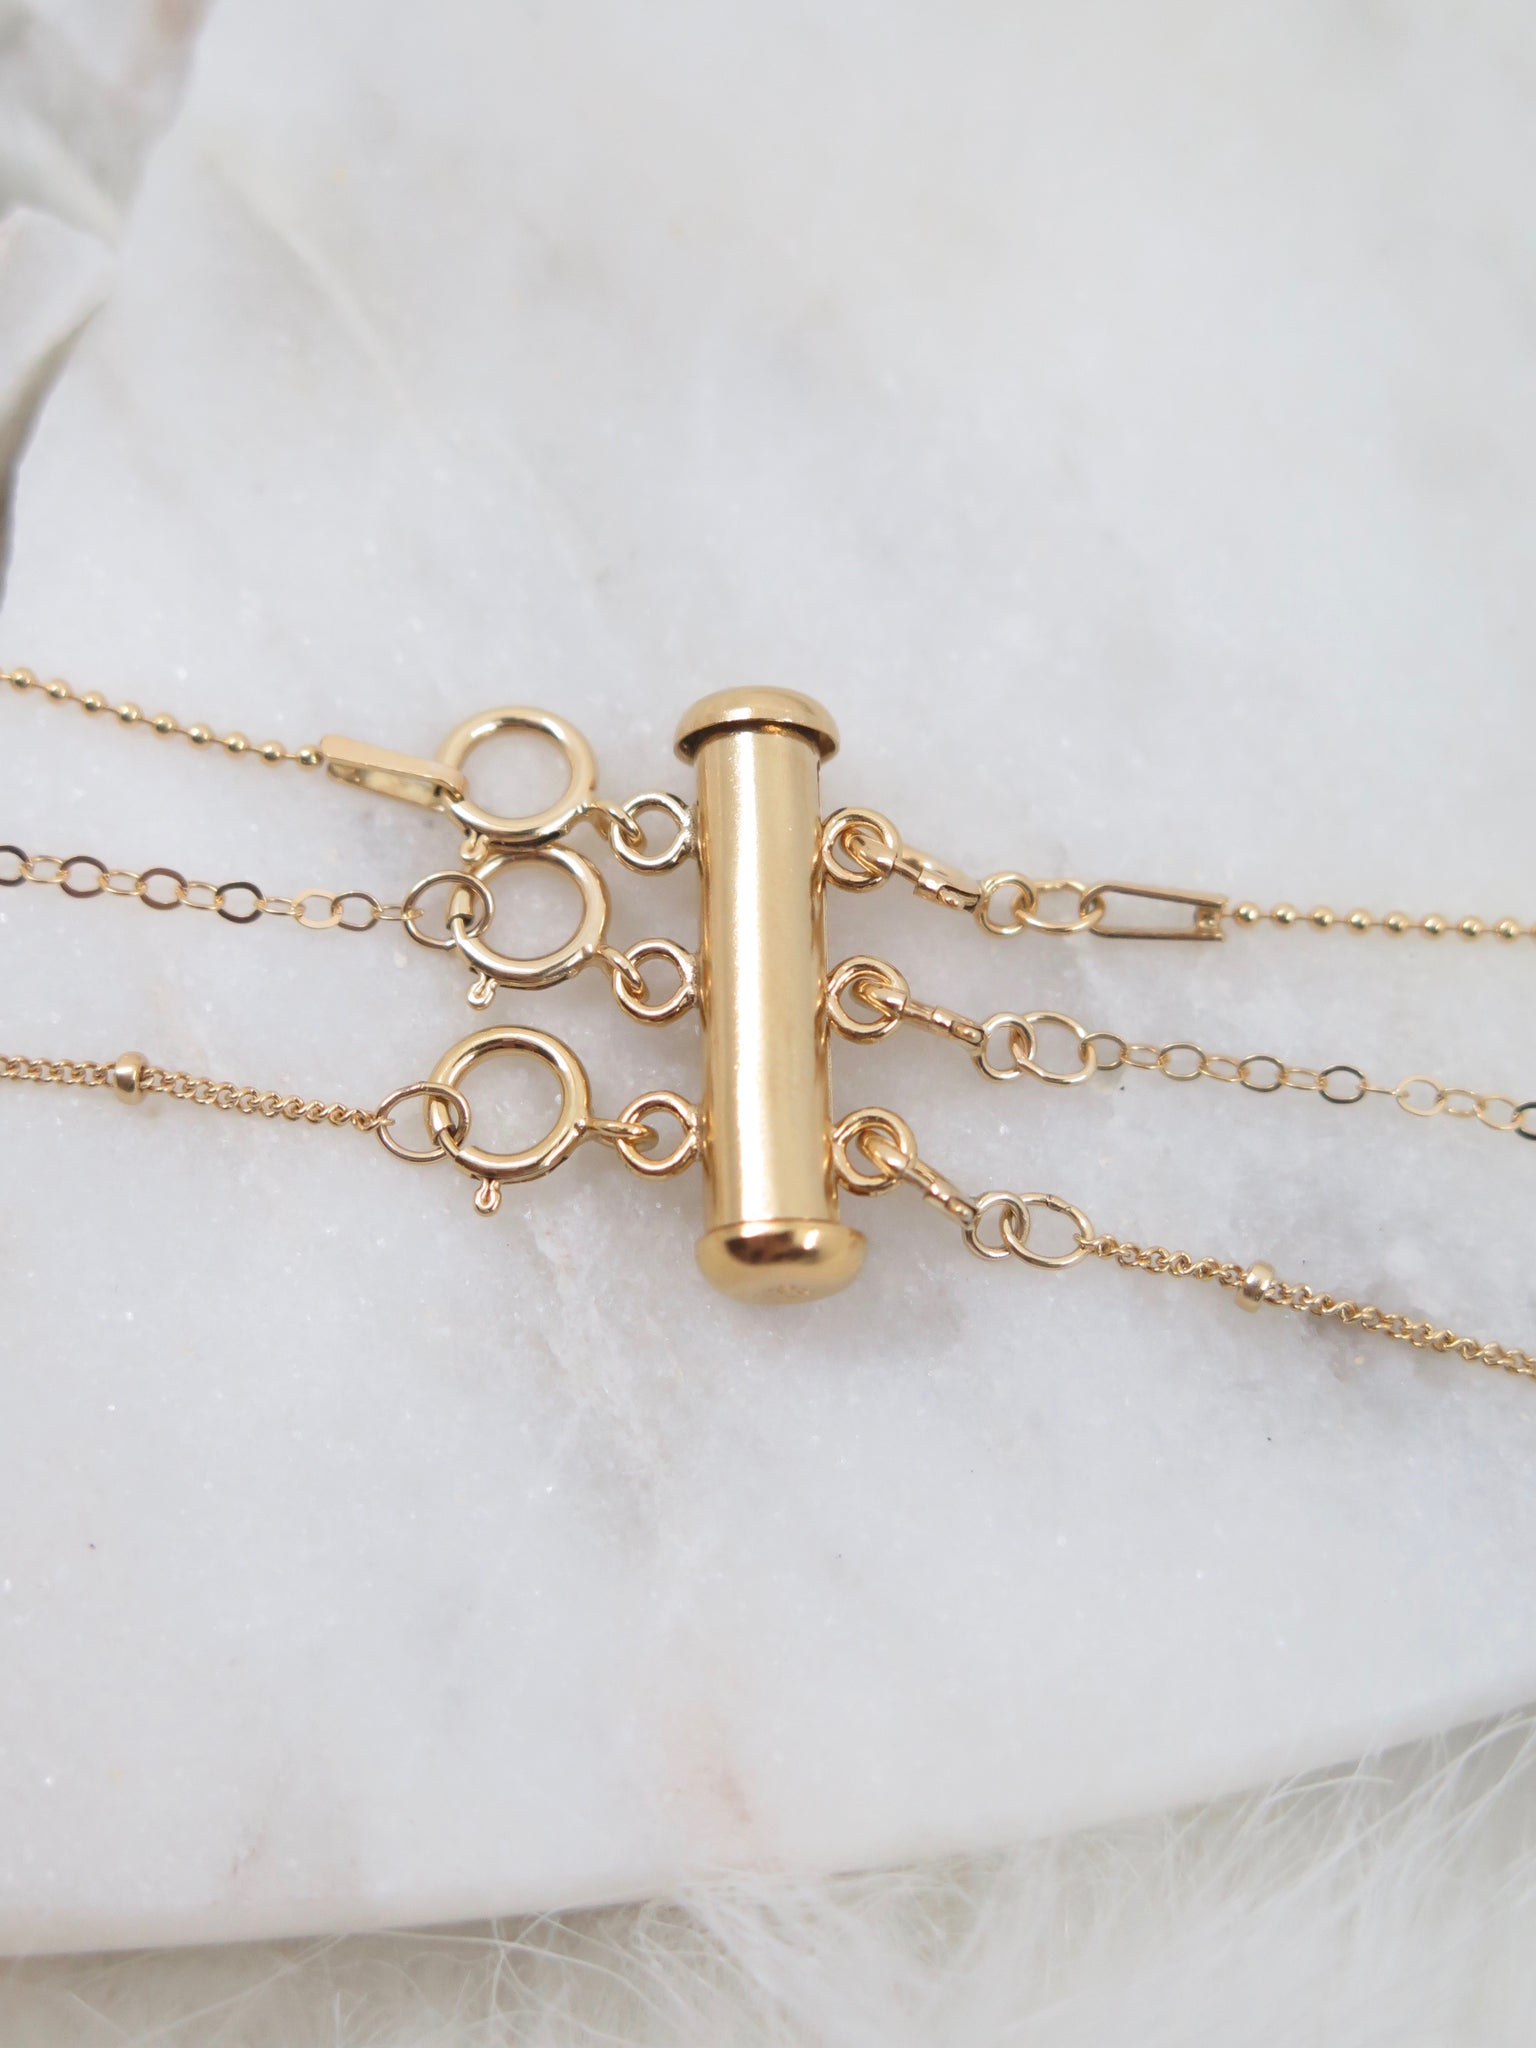  COHEALI Necklace Layered Buckle Necklace Detangler Necklace  Layering Clasps Double Necklace Clasp Necklace Lobster Clasp Jewelry  Locking Keep Multi-Layer Copper Accessories